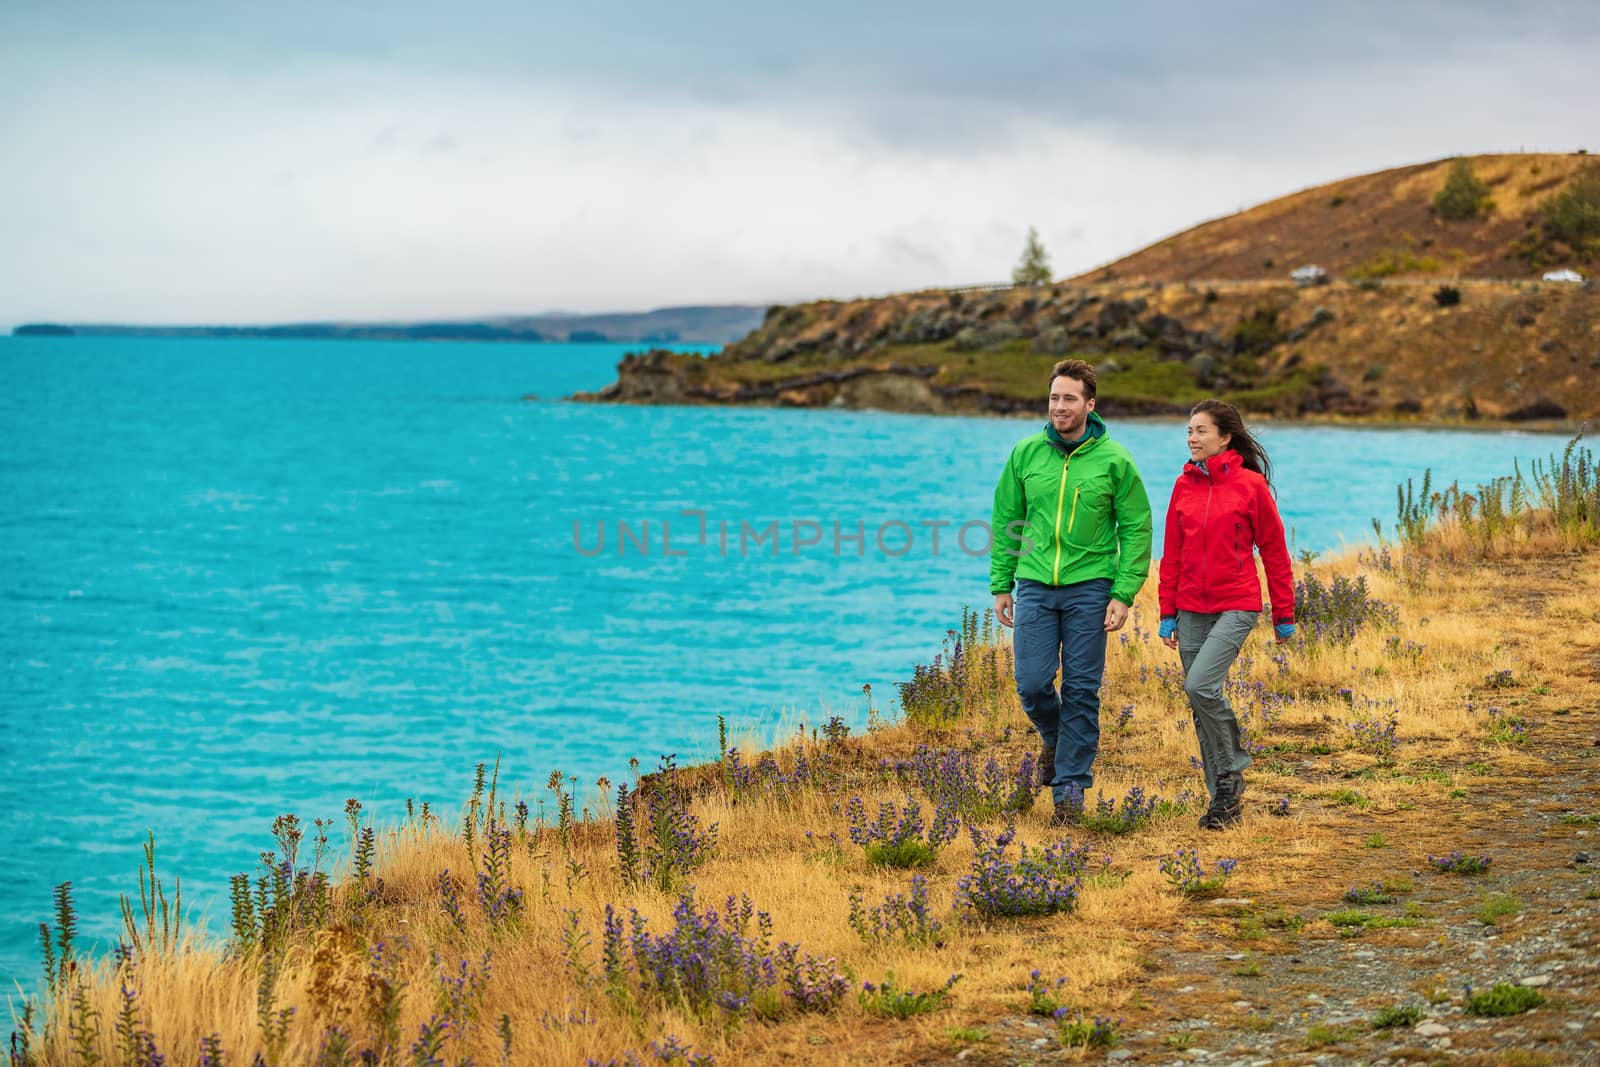 Active people in outdoor activity. Couple tourists hiking in nature with view of Lake Pukaki near Aoraki aka Mount Cook, a famous tourist destination on New Zealand.